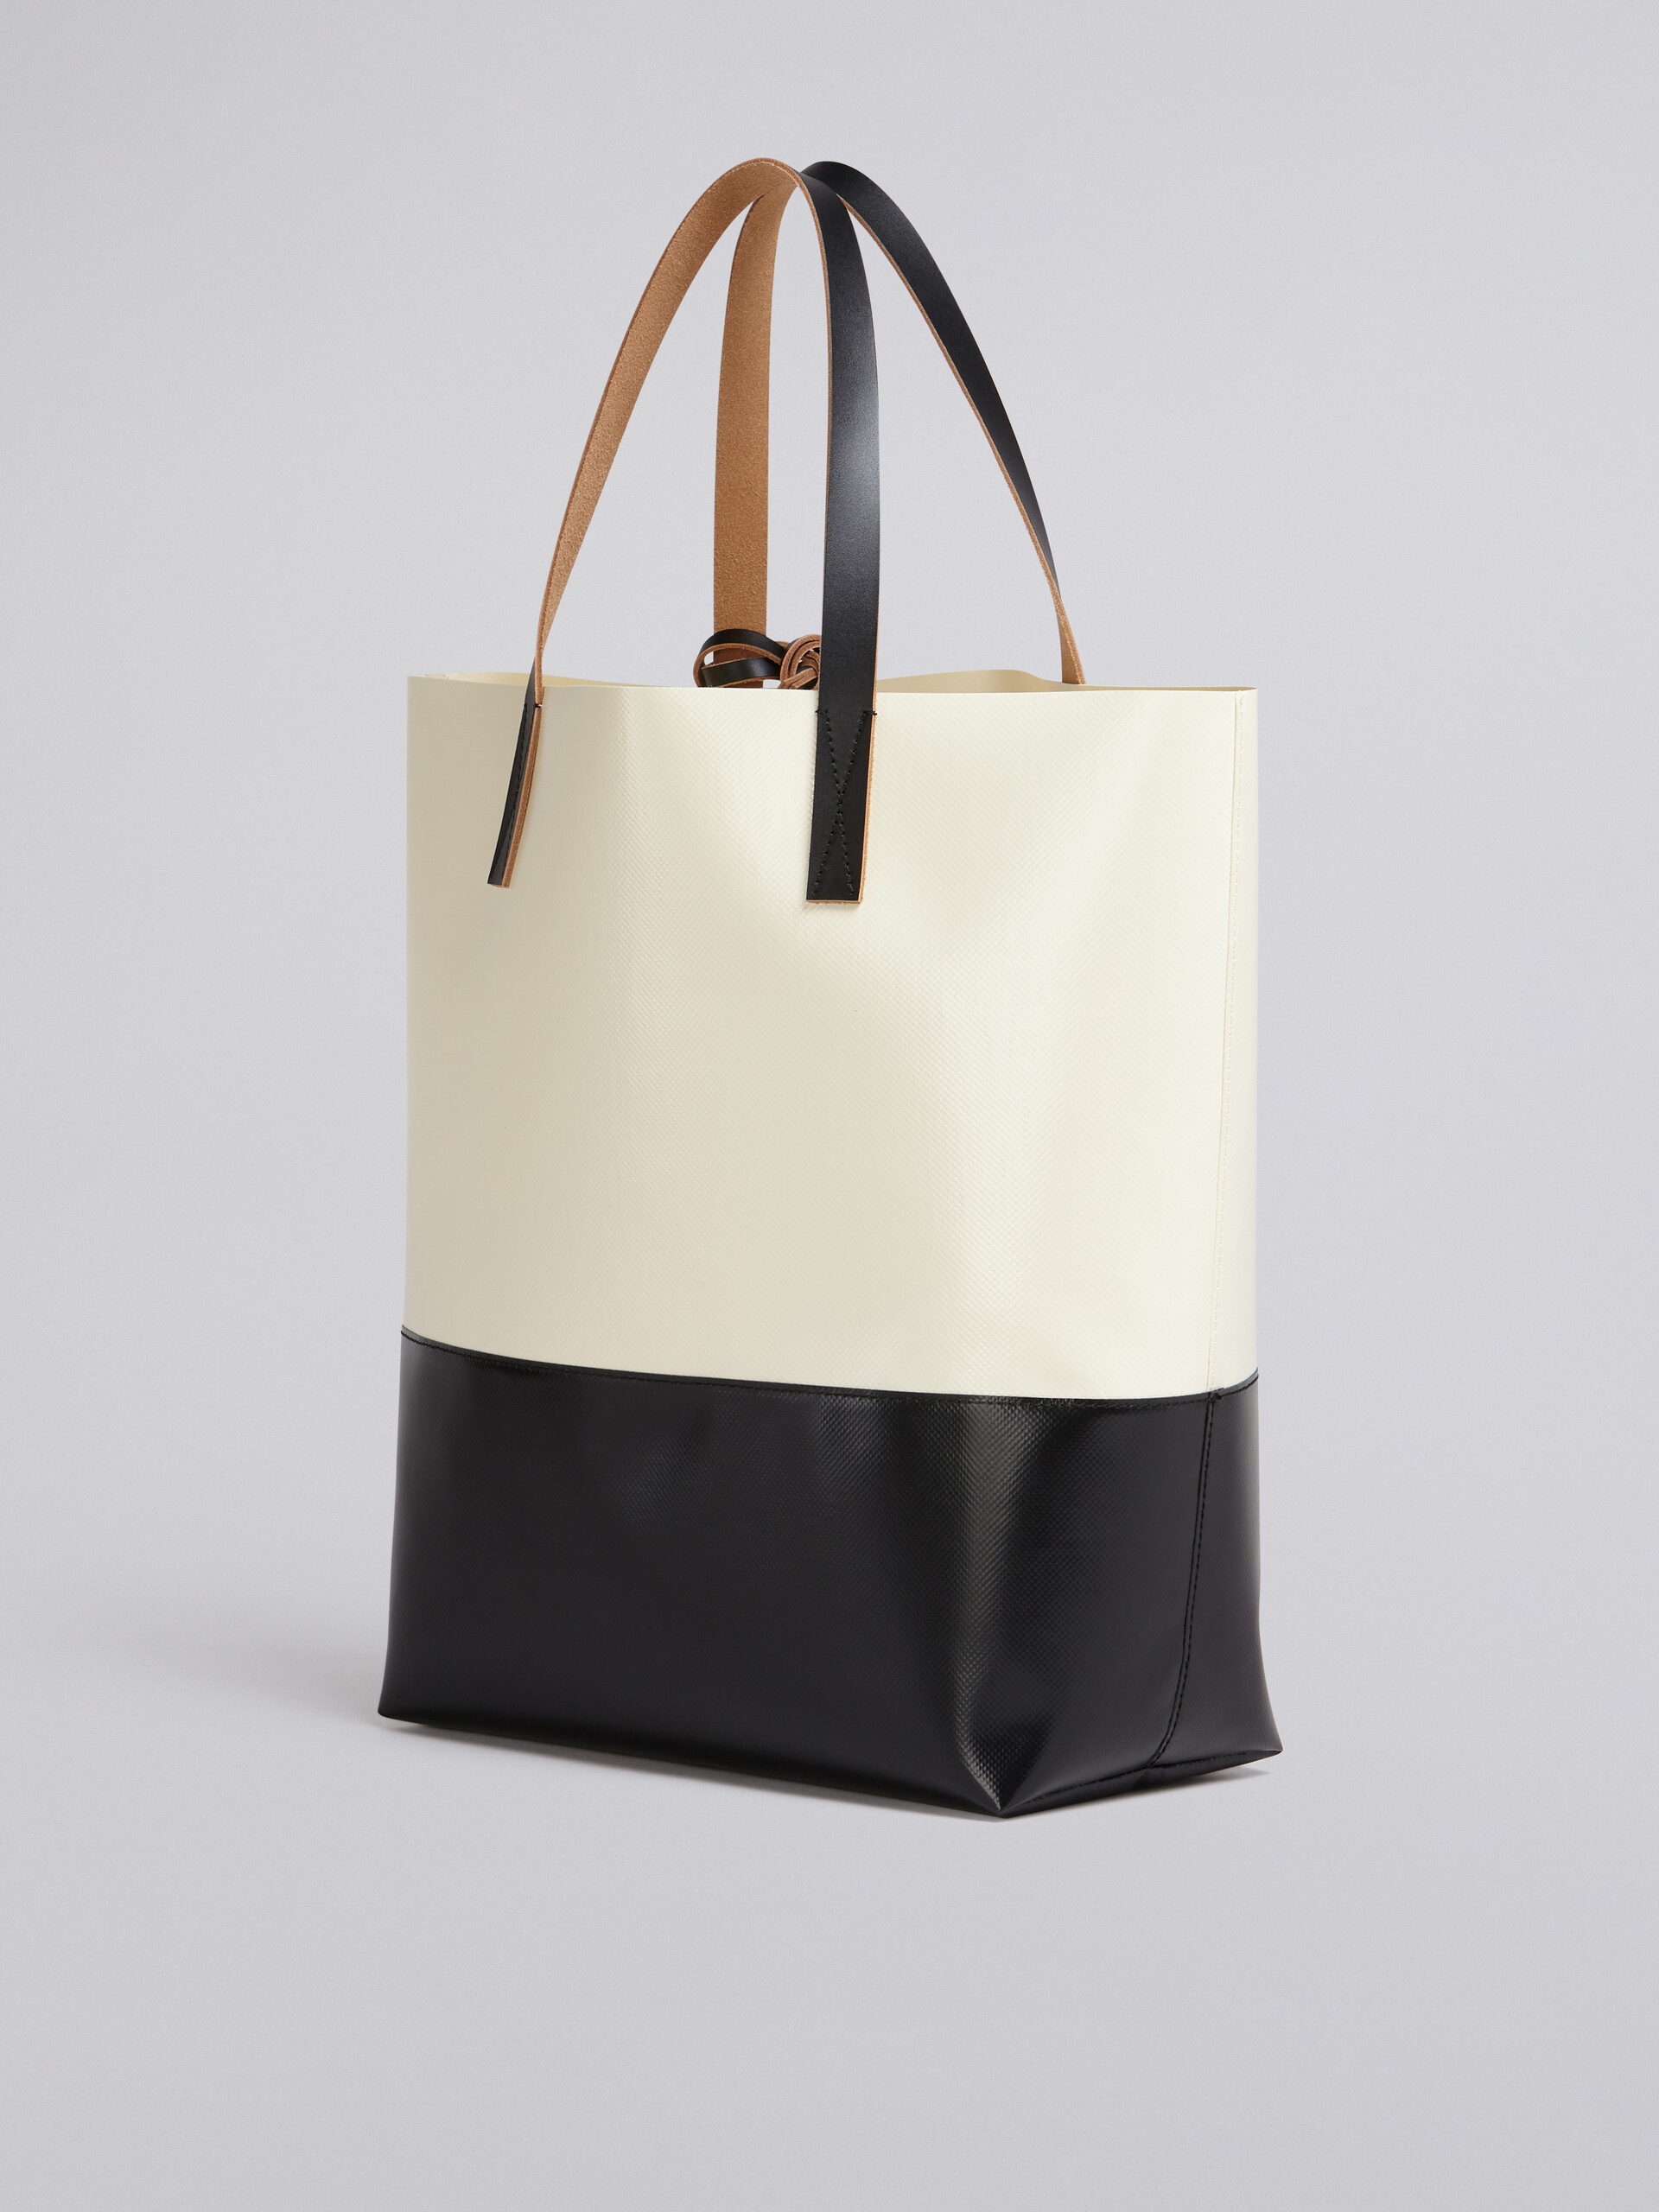 Tribeca shopping bag in white and black | Marni